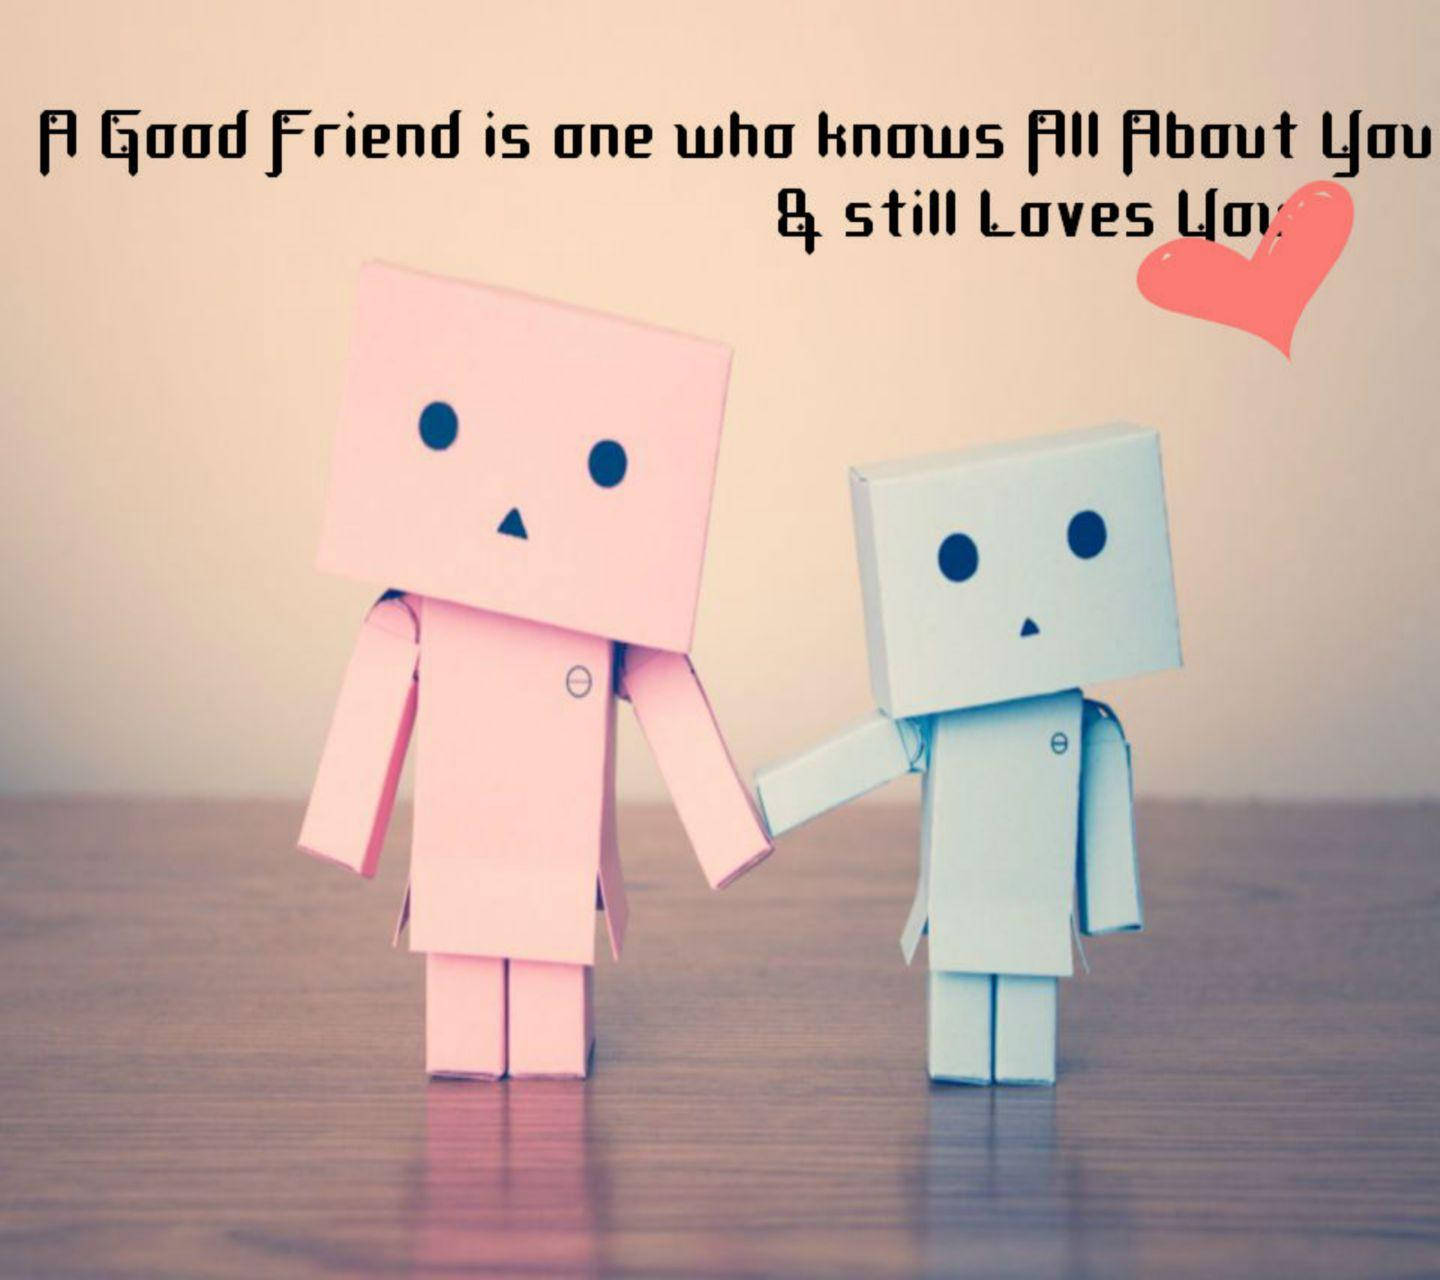 Friendship Of Two Cute Cardboard Toys Background